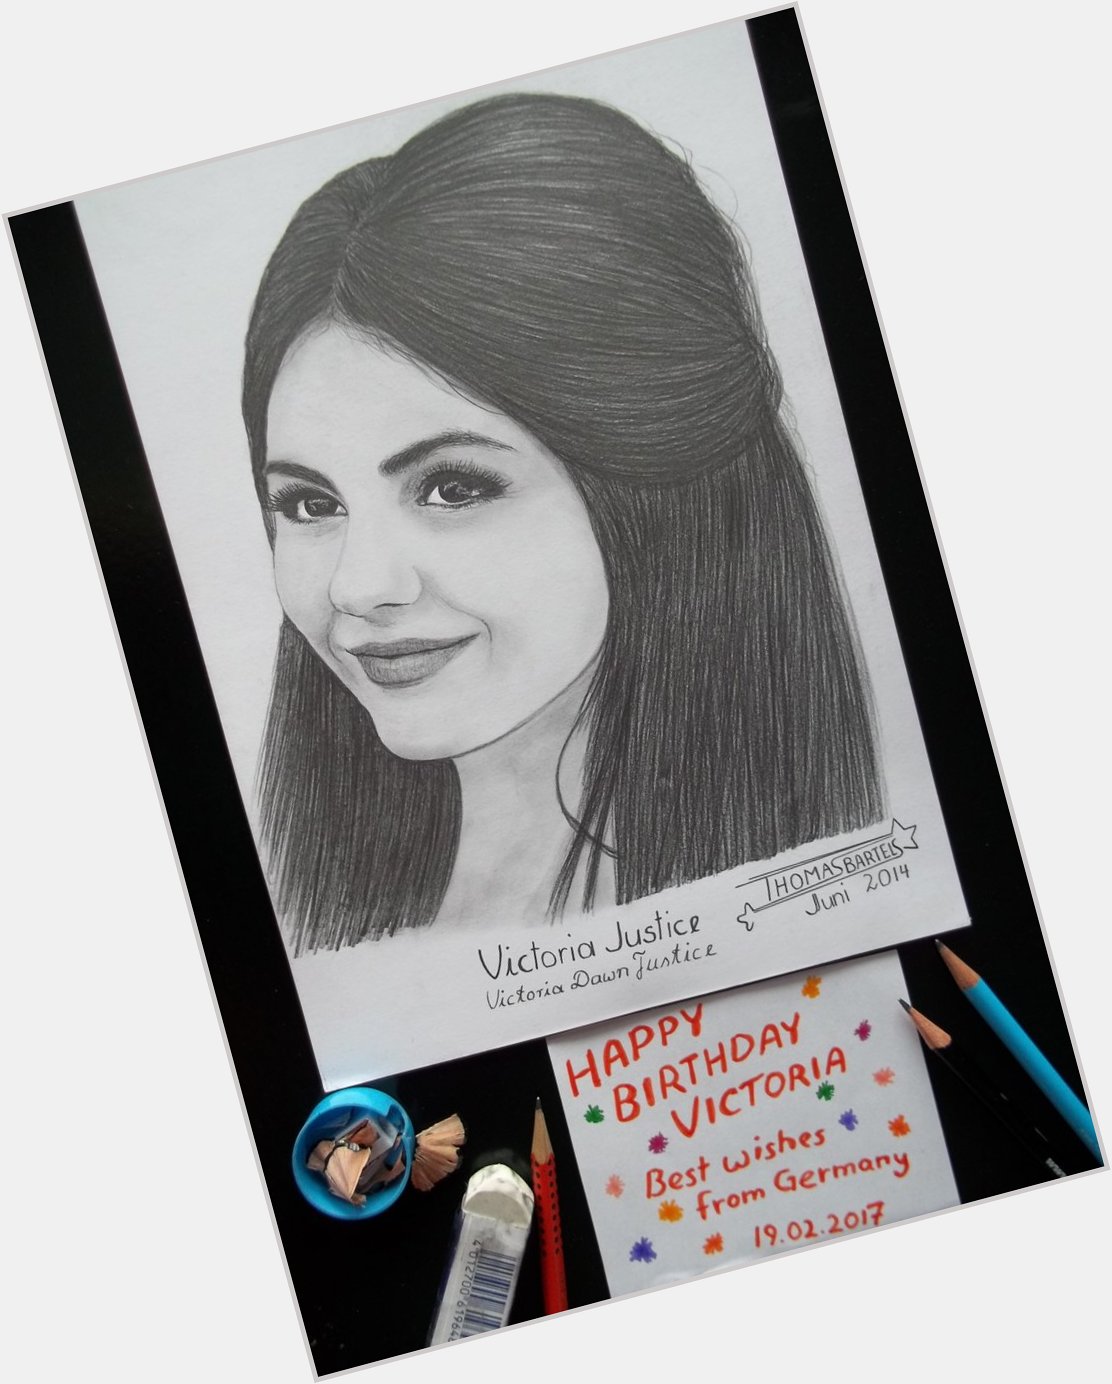   Happy Birthday Victoria Justice !!   Best wishes from Germany!!   